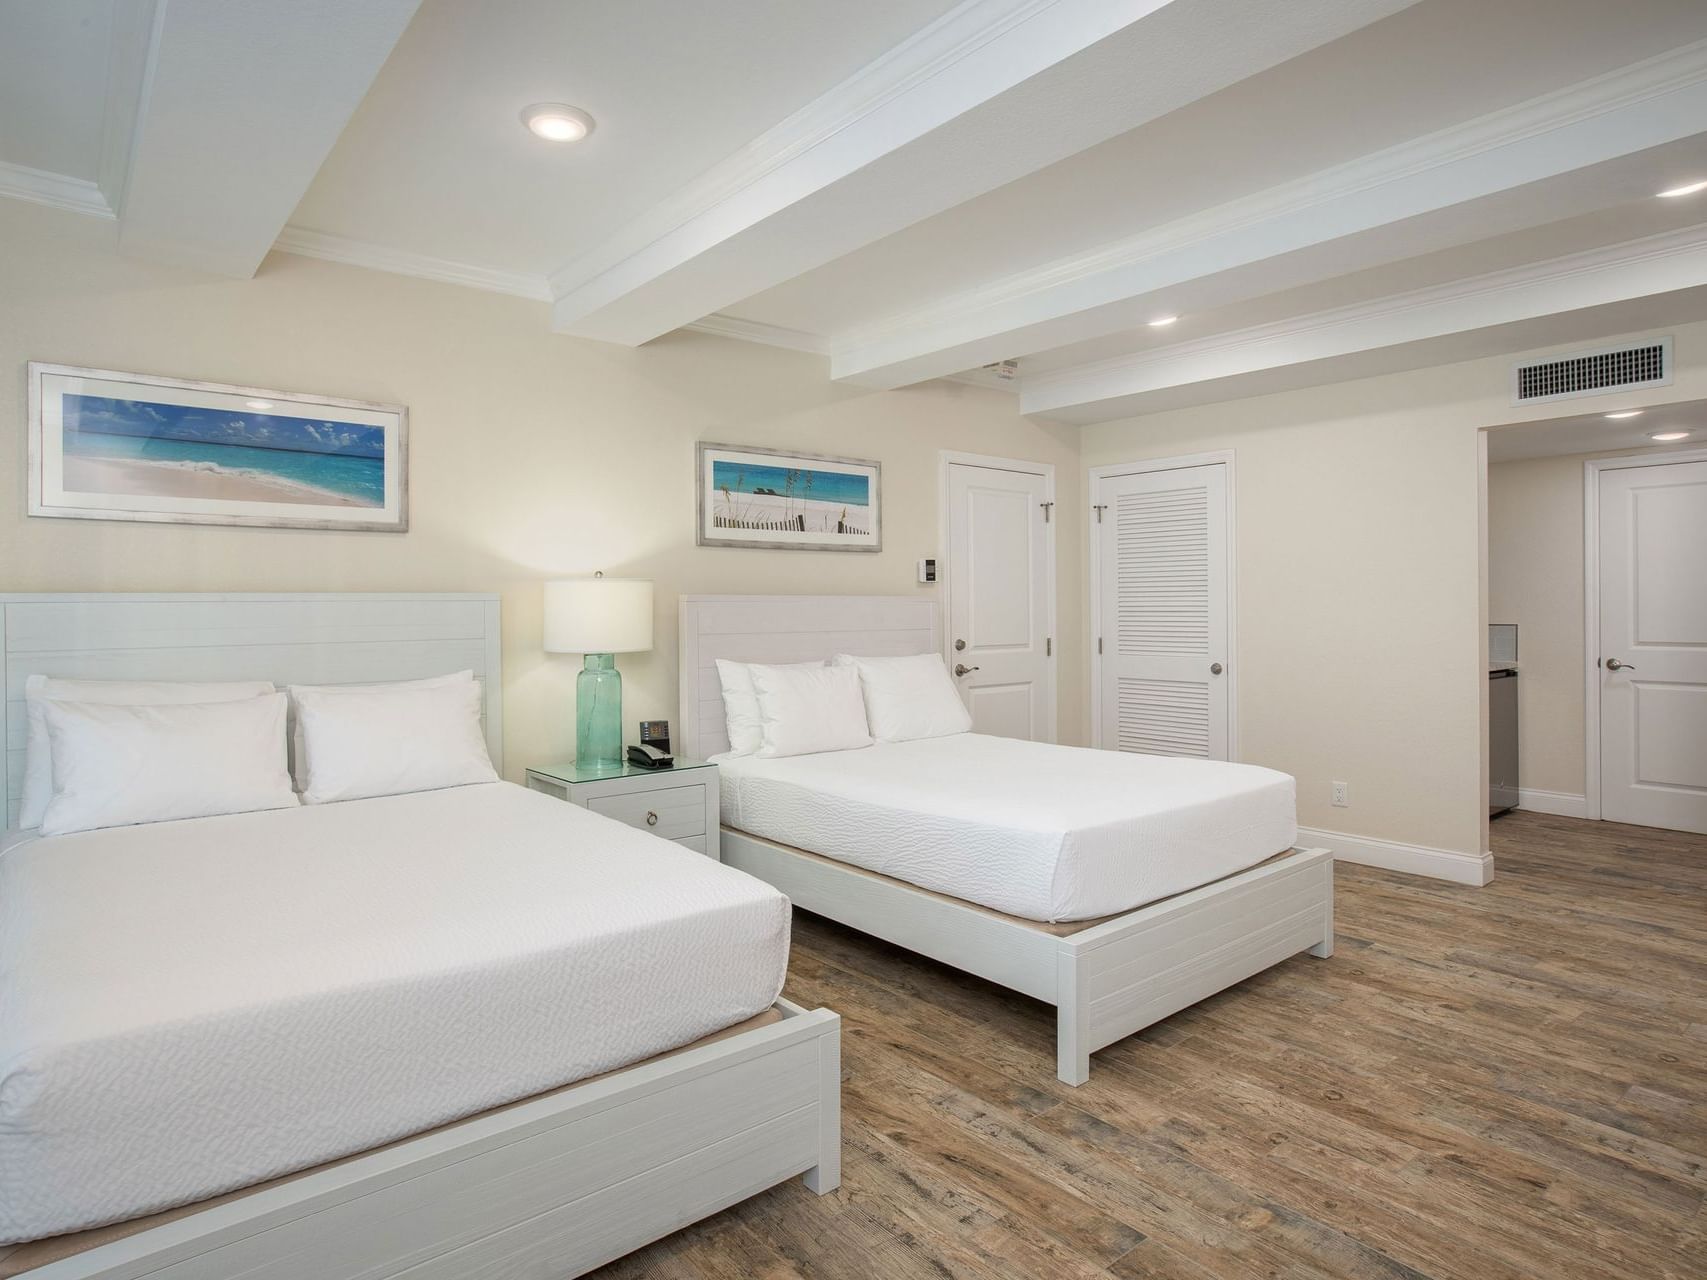 Beds in Studio type bedroom suite at Legacy Vacation Resorts